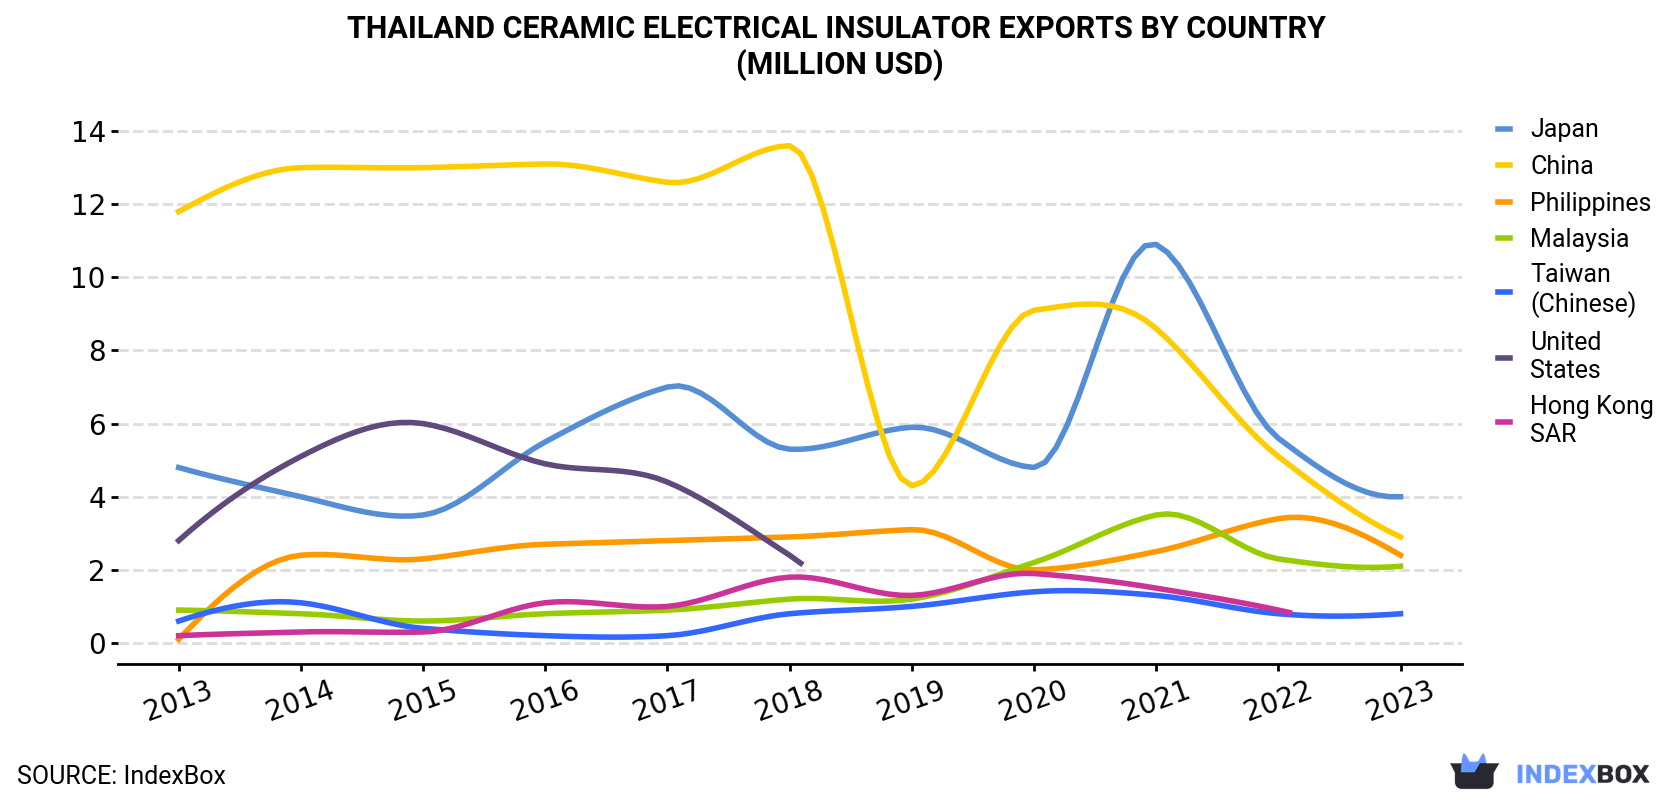 Thailand Ceramic Electrical Insulator Exports By Country (Million USD)